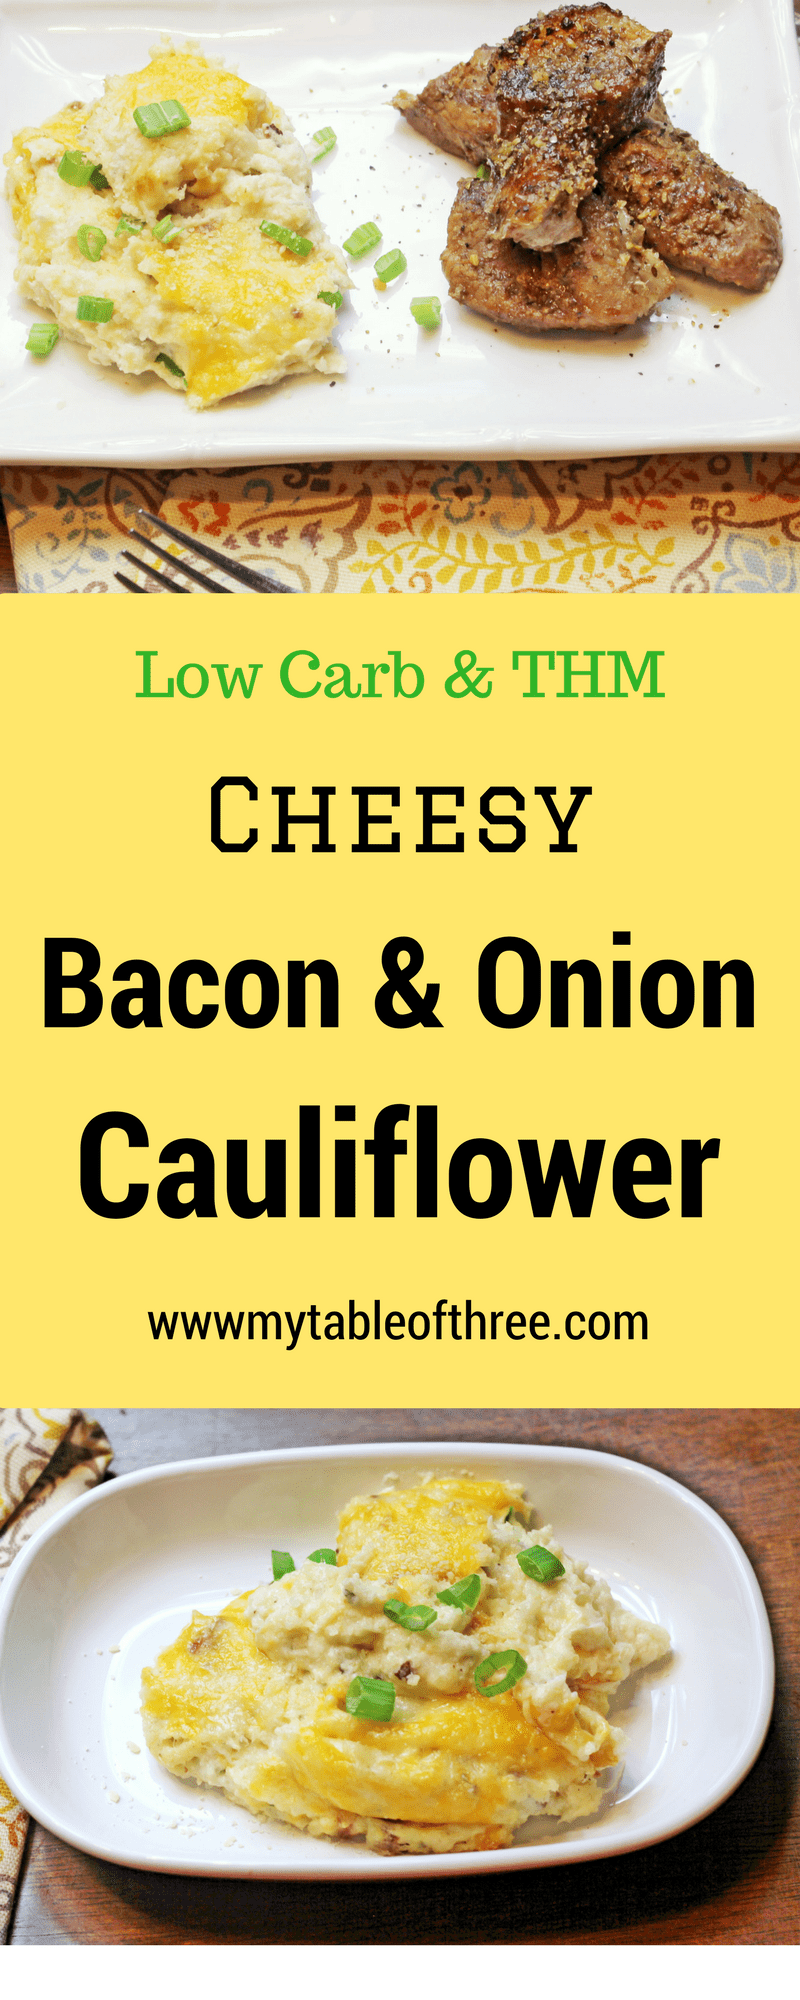 Cheesy Bacon and Onion Cauliflower is an easy low carb and THM side dish.